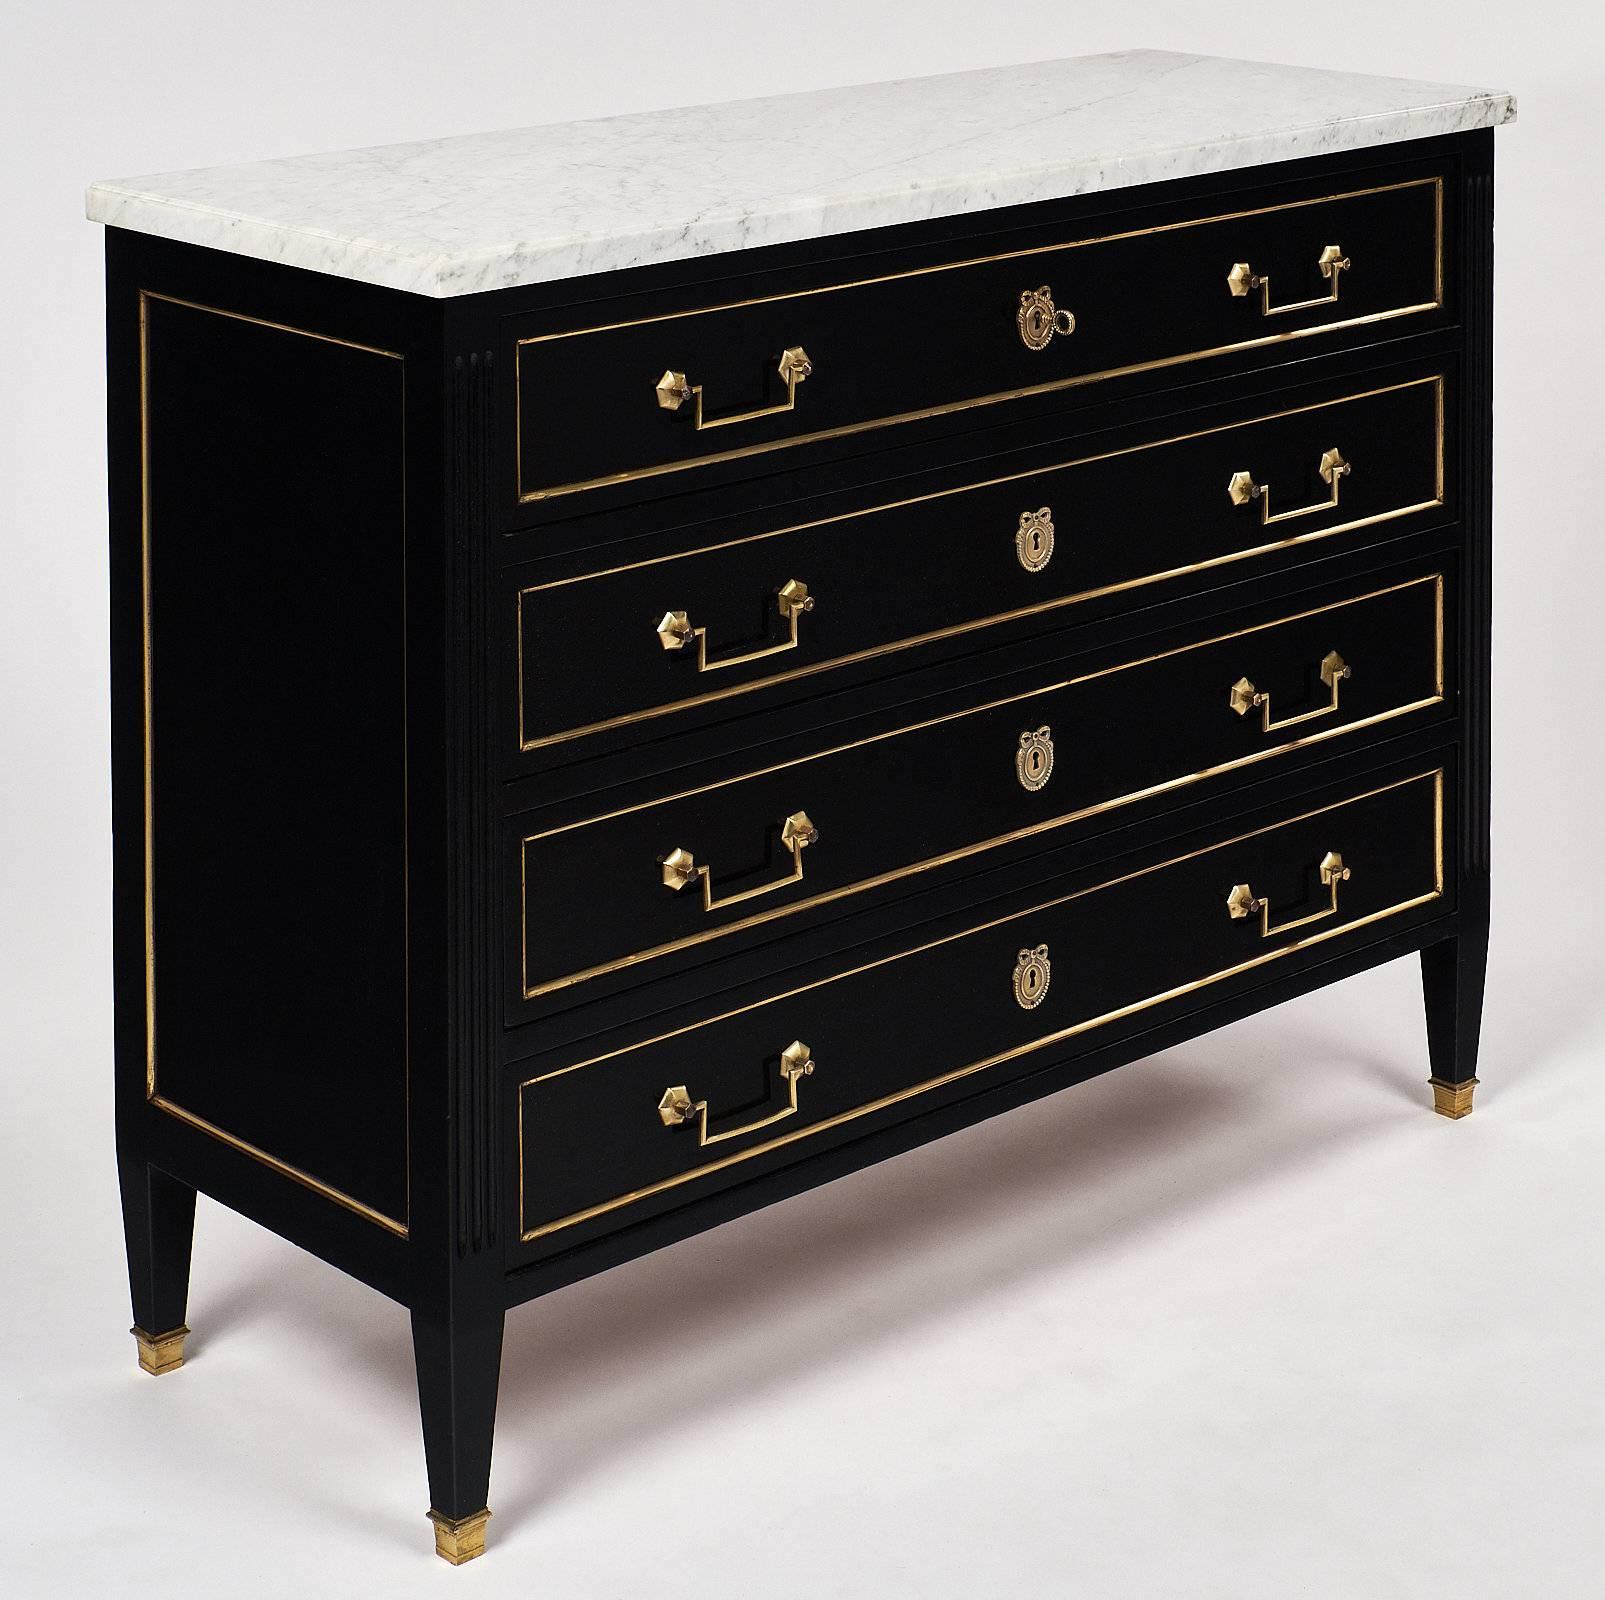 Classic Louis XVI style chest with a beautifully veined Carrara marble top. This chest has been ebonized and finished with a lustrous French polish. There are four drawers, each with brass pulls. There are working locks on all four drawers, with one